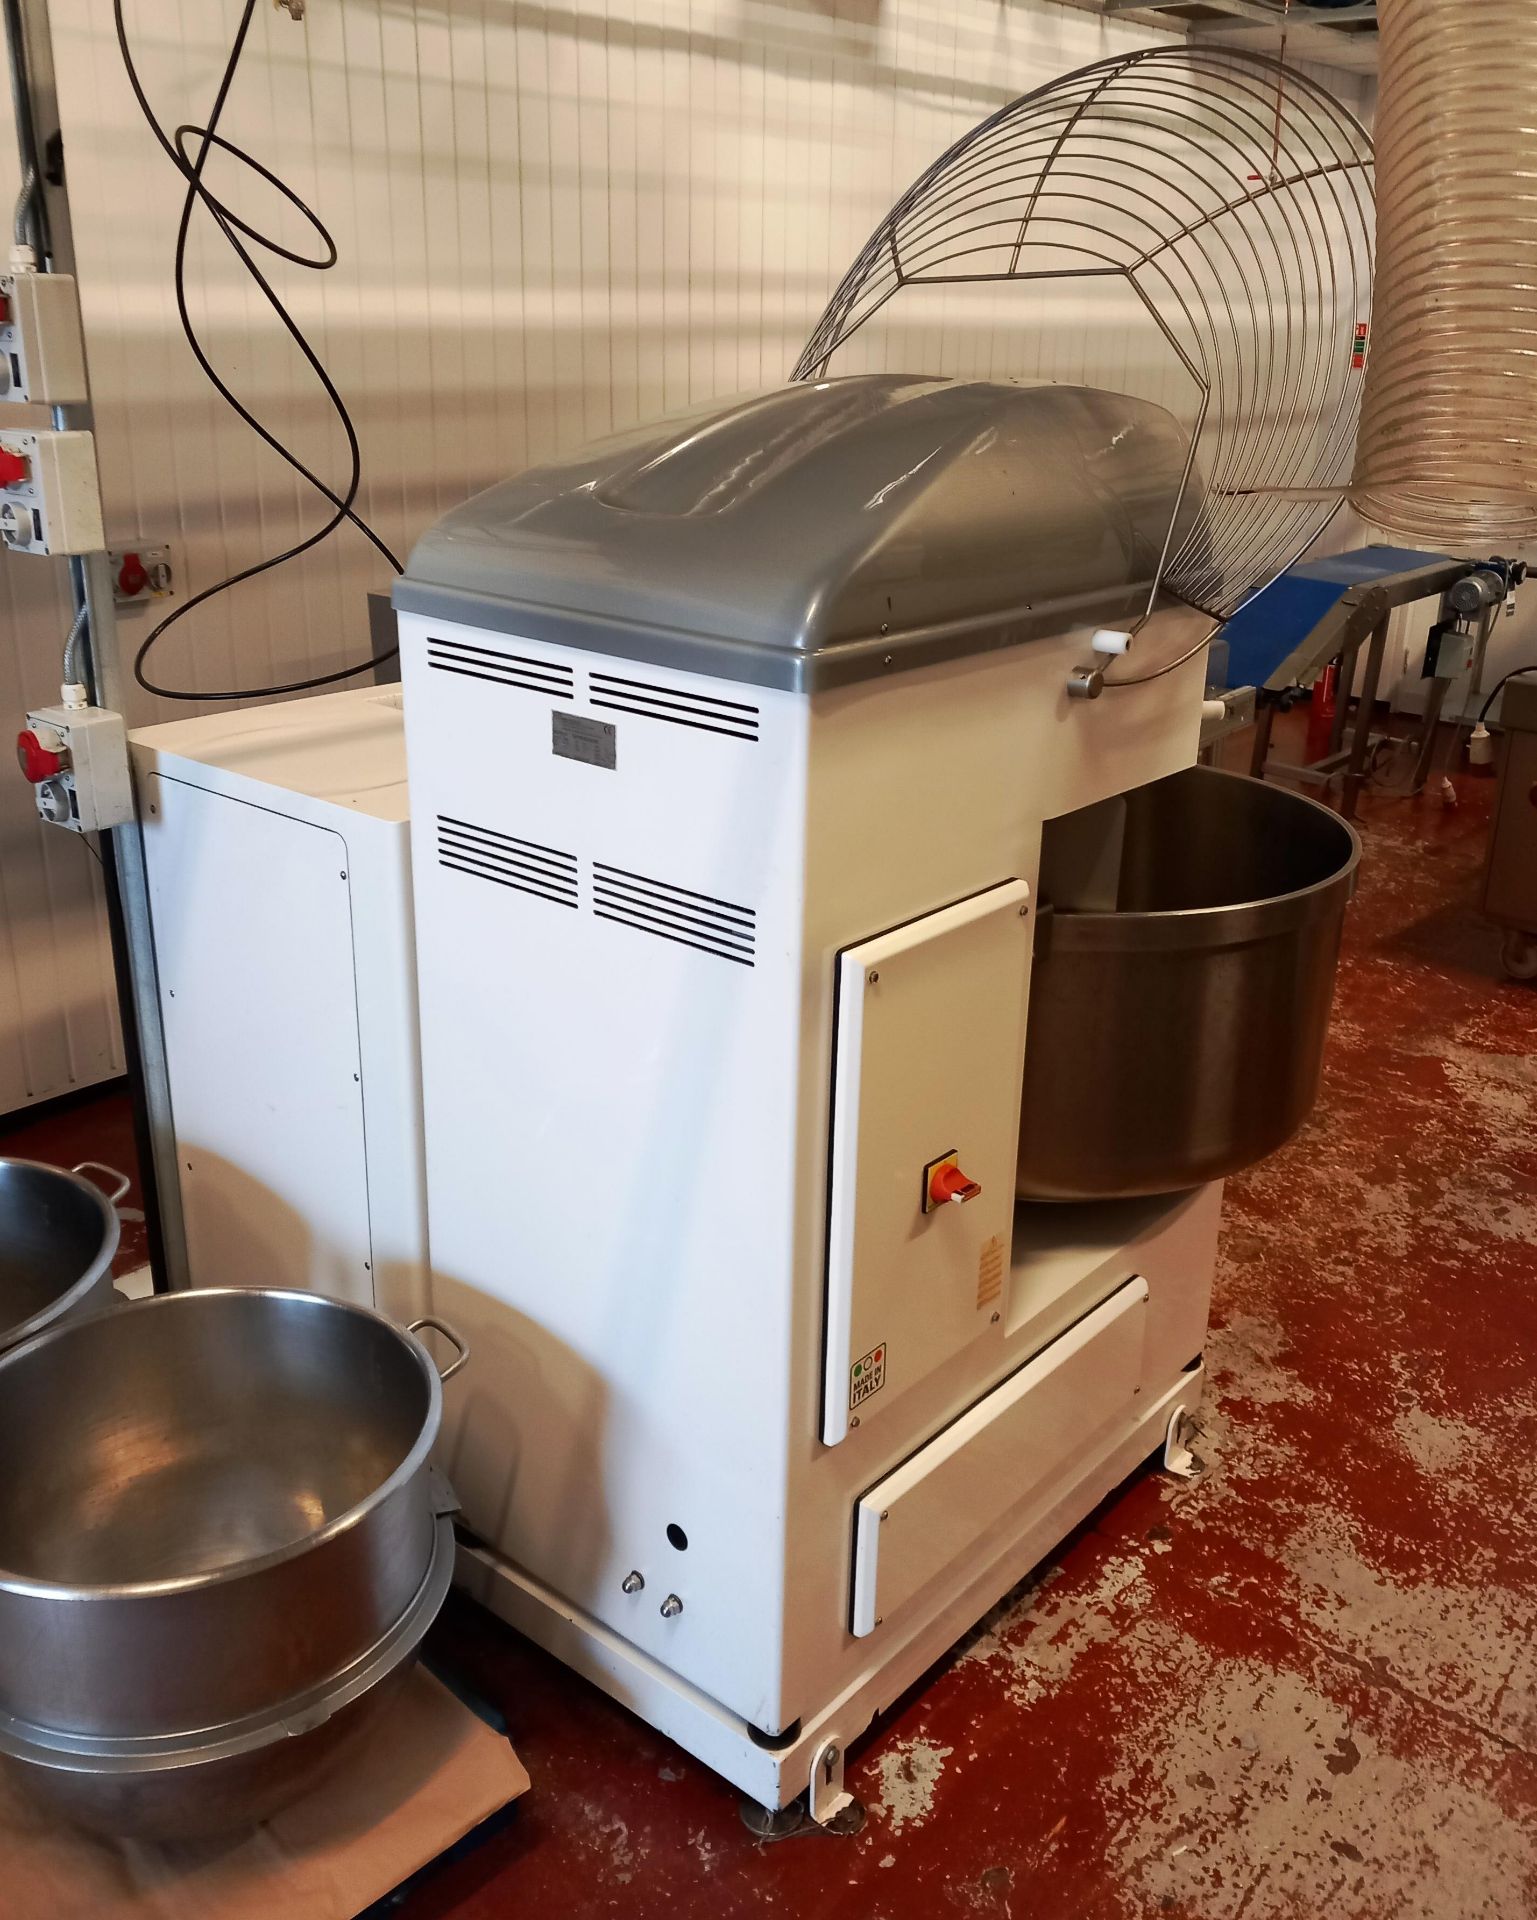 Mecnosud SPRB200 Auto Tipping 200 ltr Spiral Mixer (2015) 3 Phase - Image 5 of 6